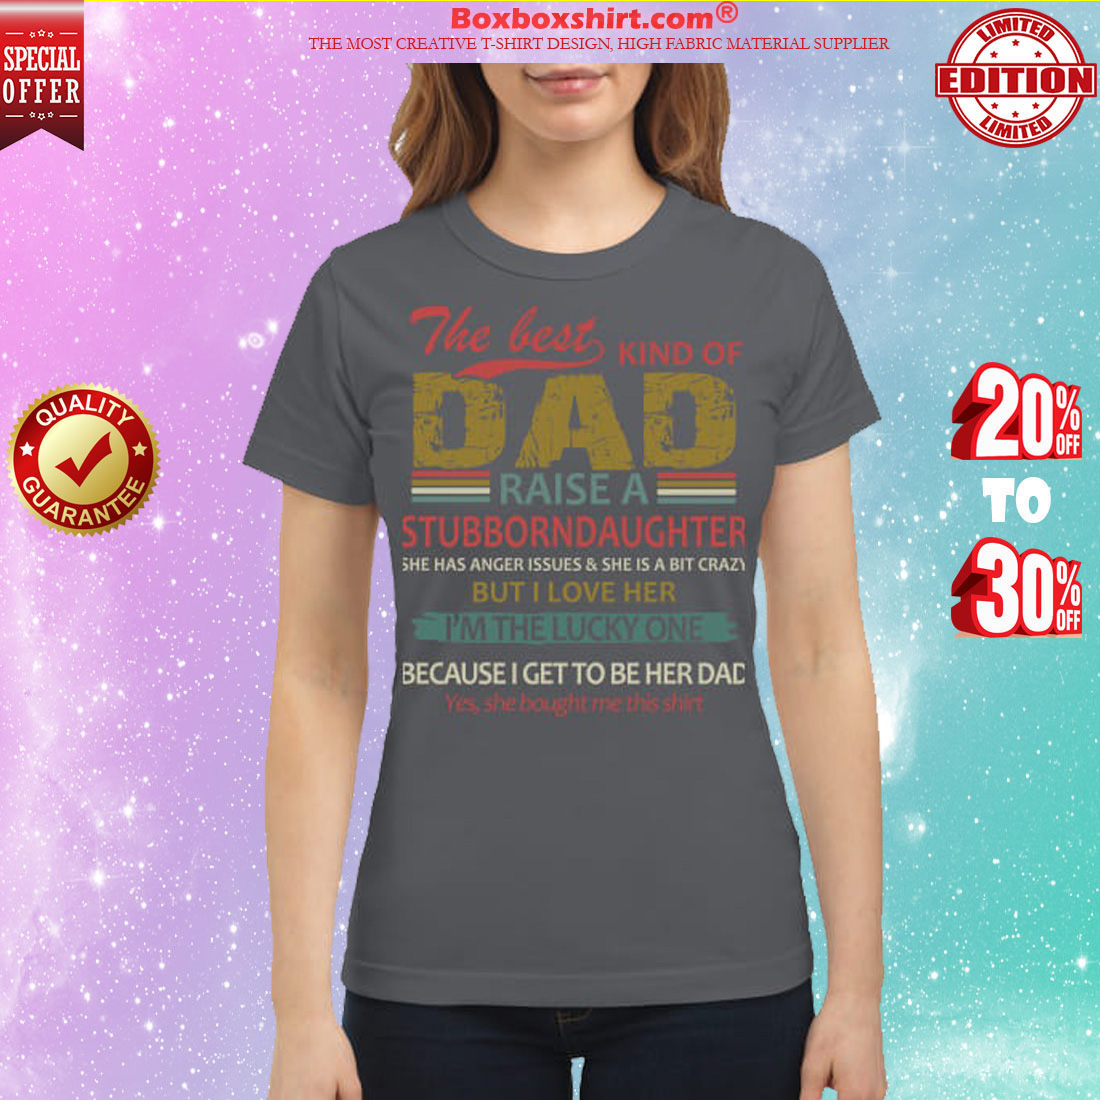 The best kind of dad raise a stubborndaughter classic shirt